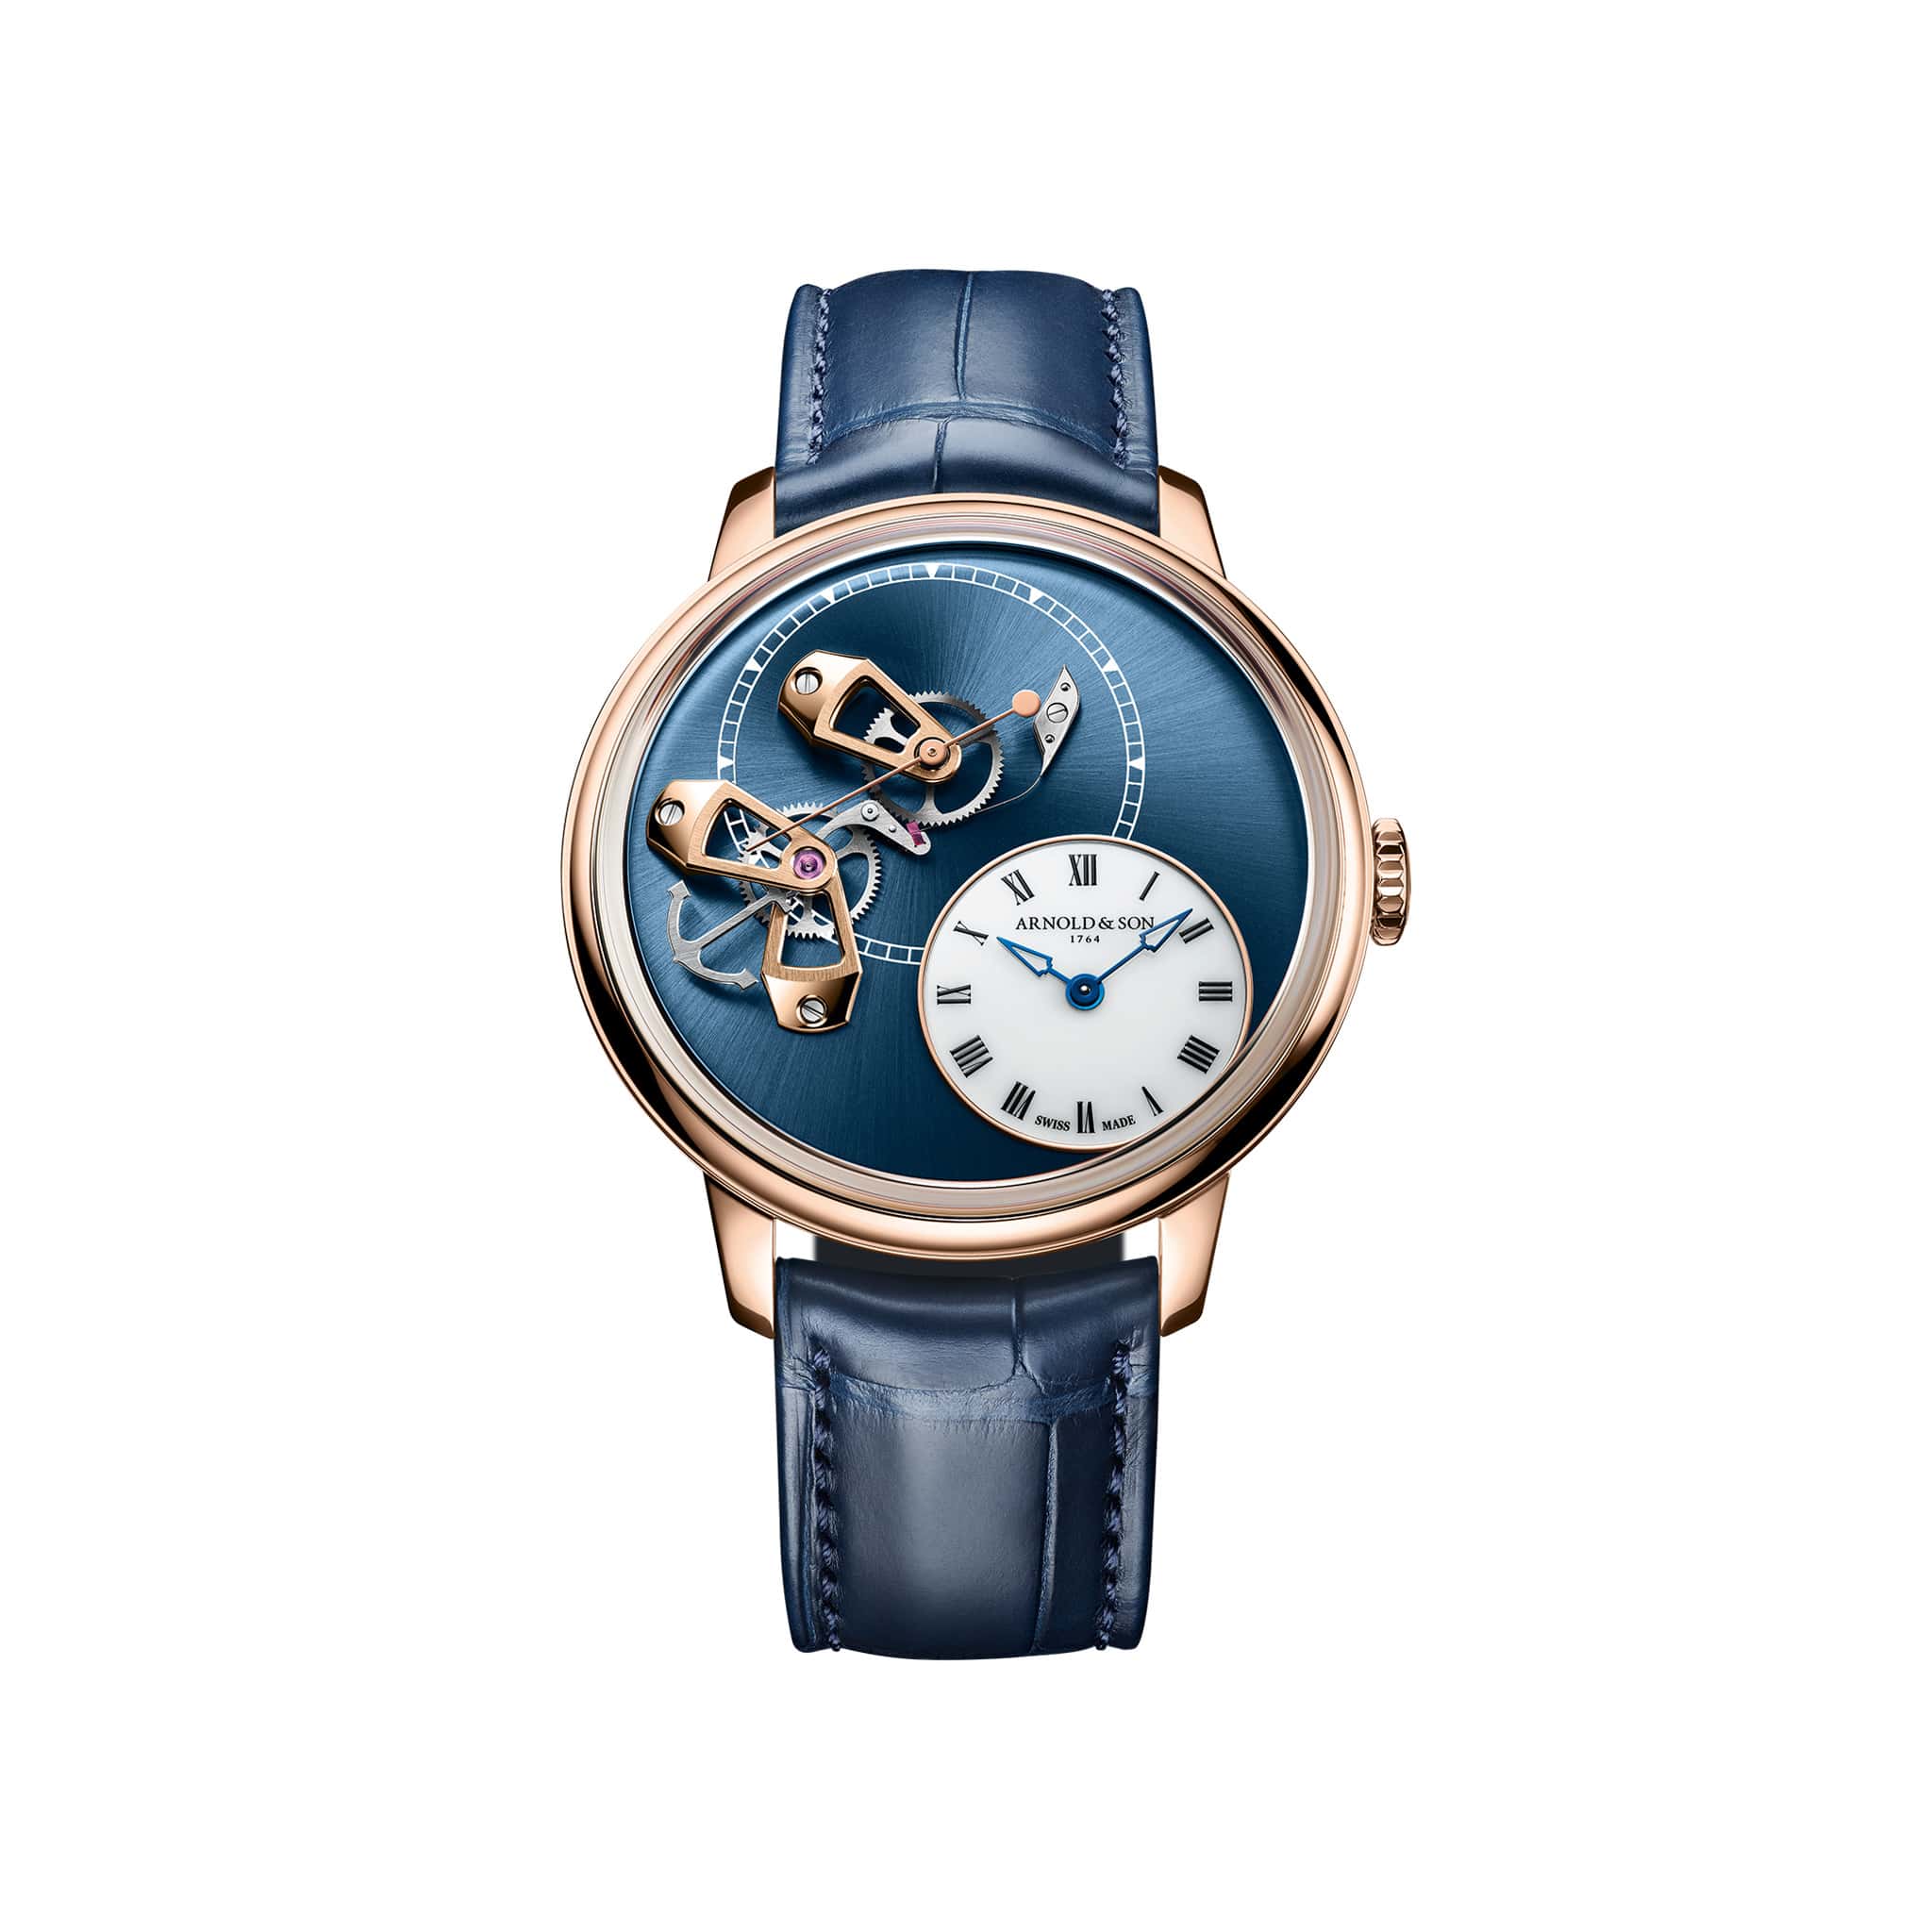 Arnold & Son — Swiss watch manufacturer founded in London. Since 1764